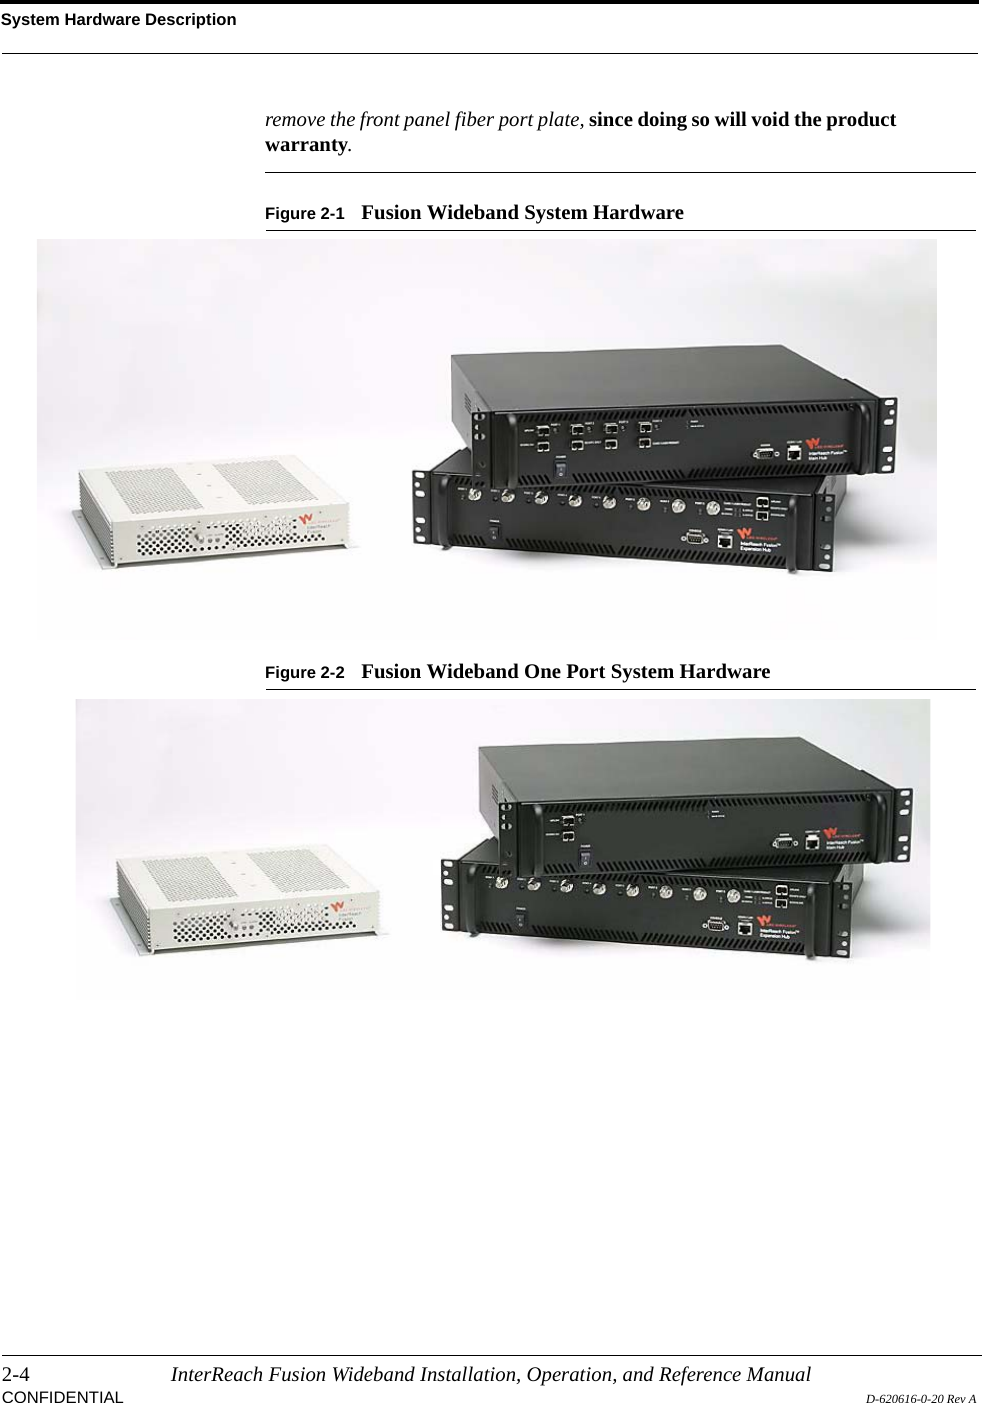 System Hardware Description2-4 InterReach Fusion Wideband Installation, Operation, and Reference ManualCONFIDENTIAL D-620616-0-20 Rev Aremove the front panel fiber port plate, since doing so will void the product warranty.Figure 2-1 Fusion Wideband System HardwareFigure 2-2 Fusion Wideband One Port System Hardware